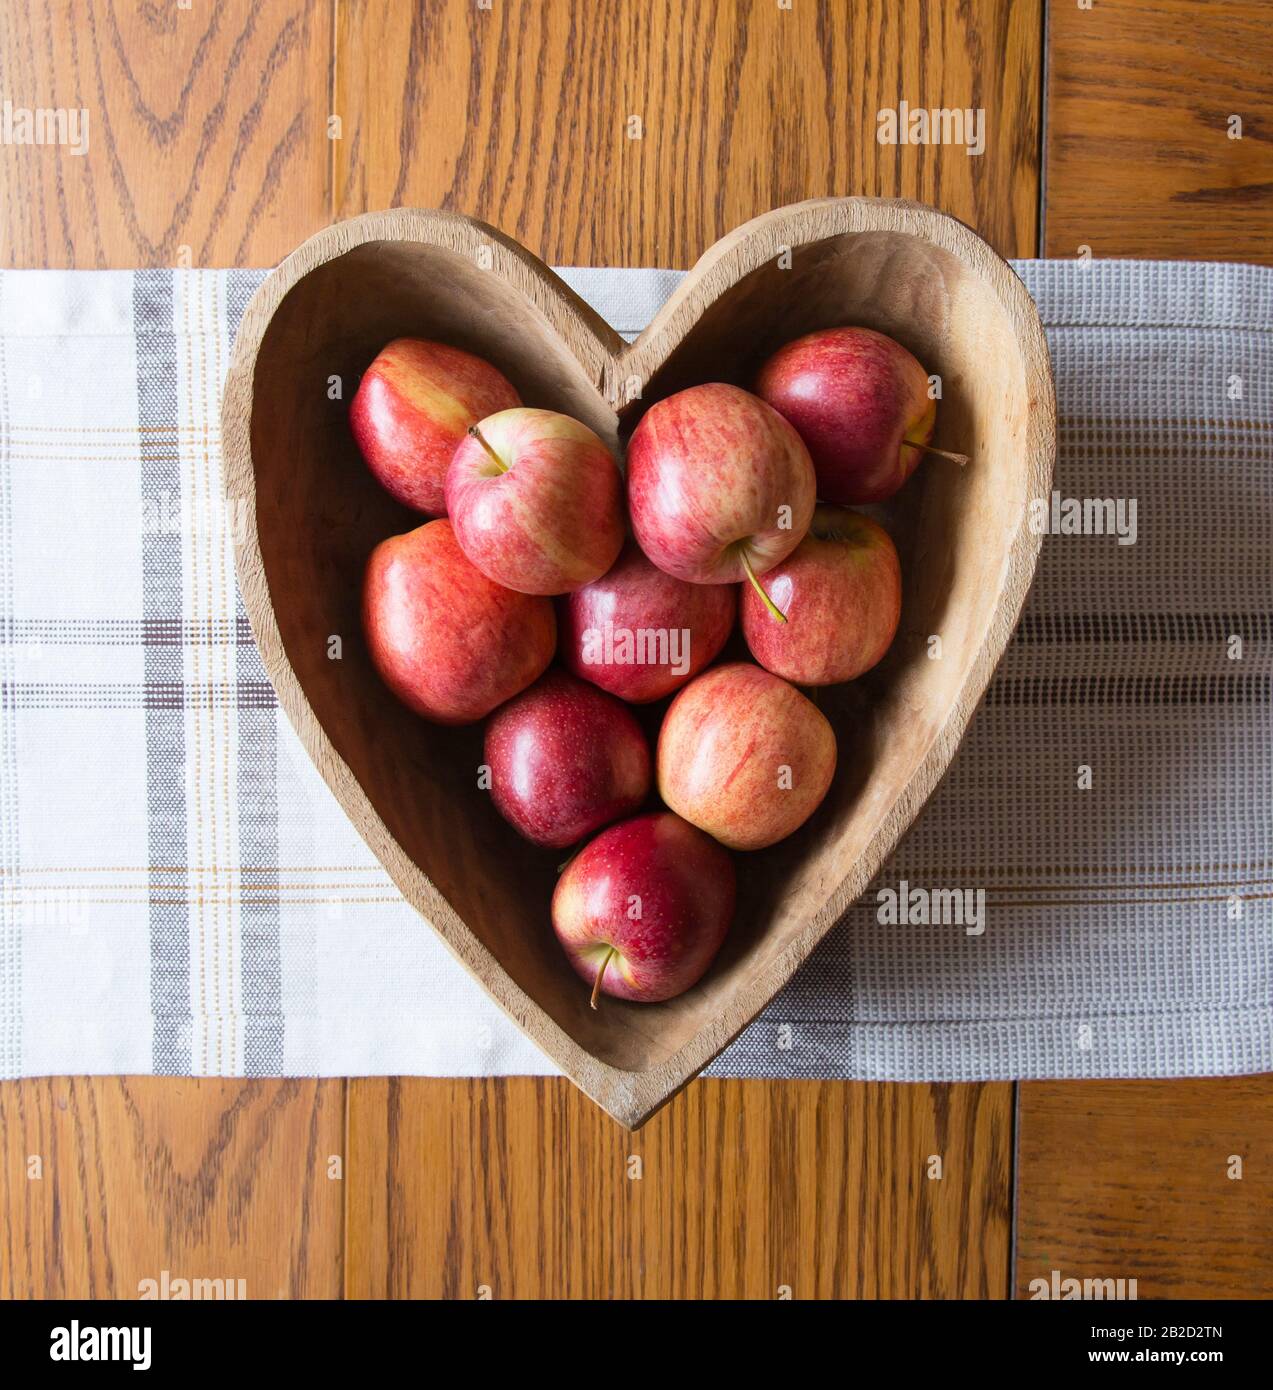 Wooden heart shaped bowl with red apples Stock Photo